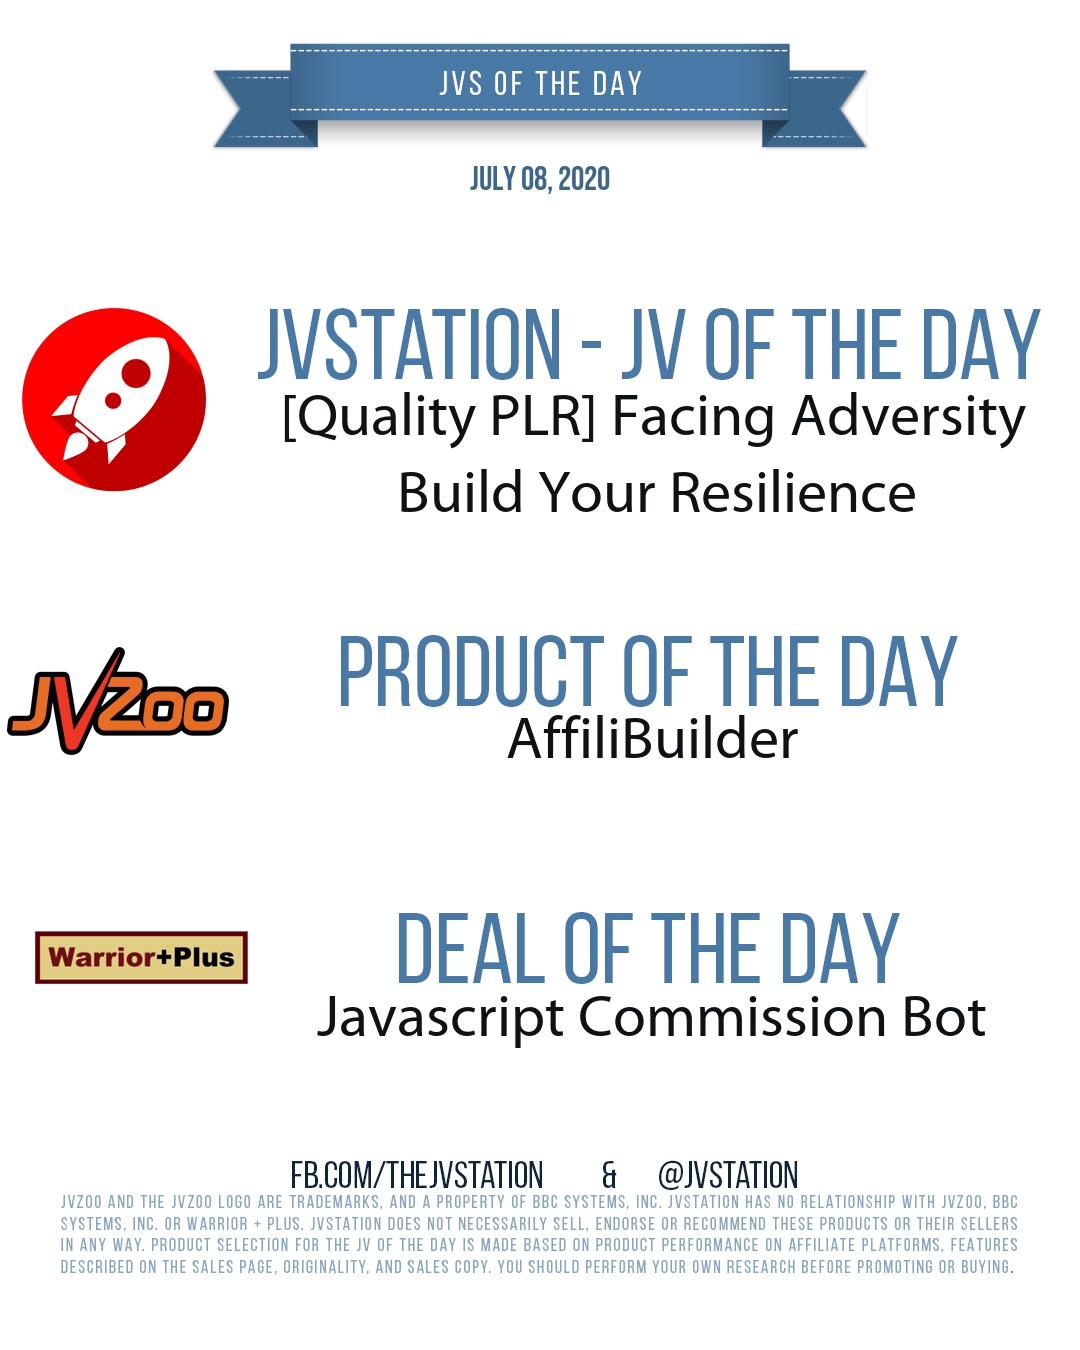 JVs of the day - July 08, 2020